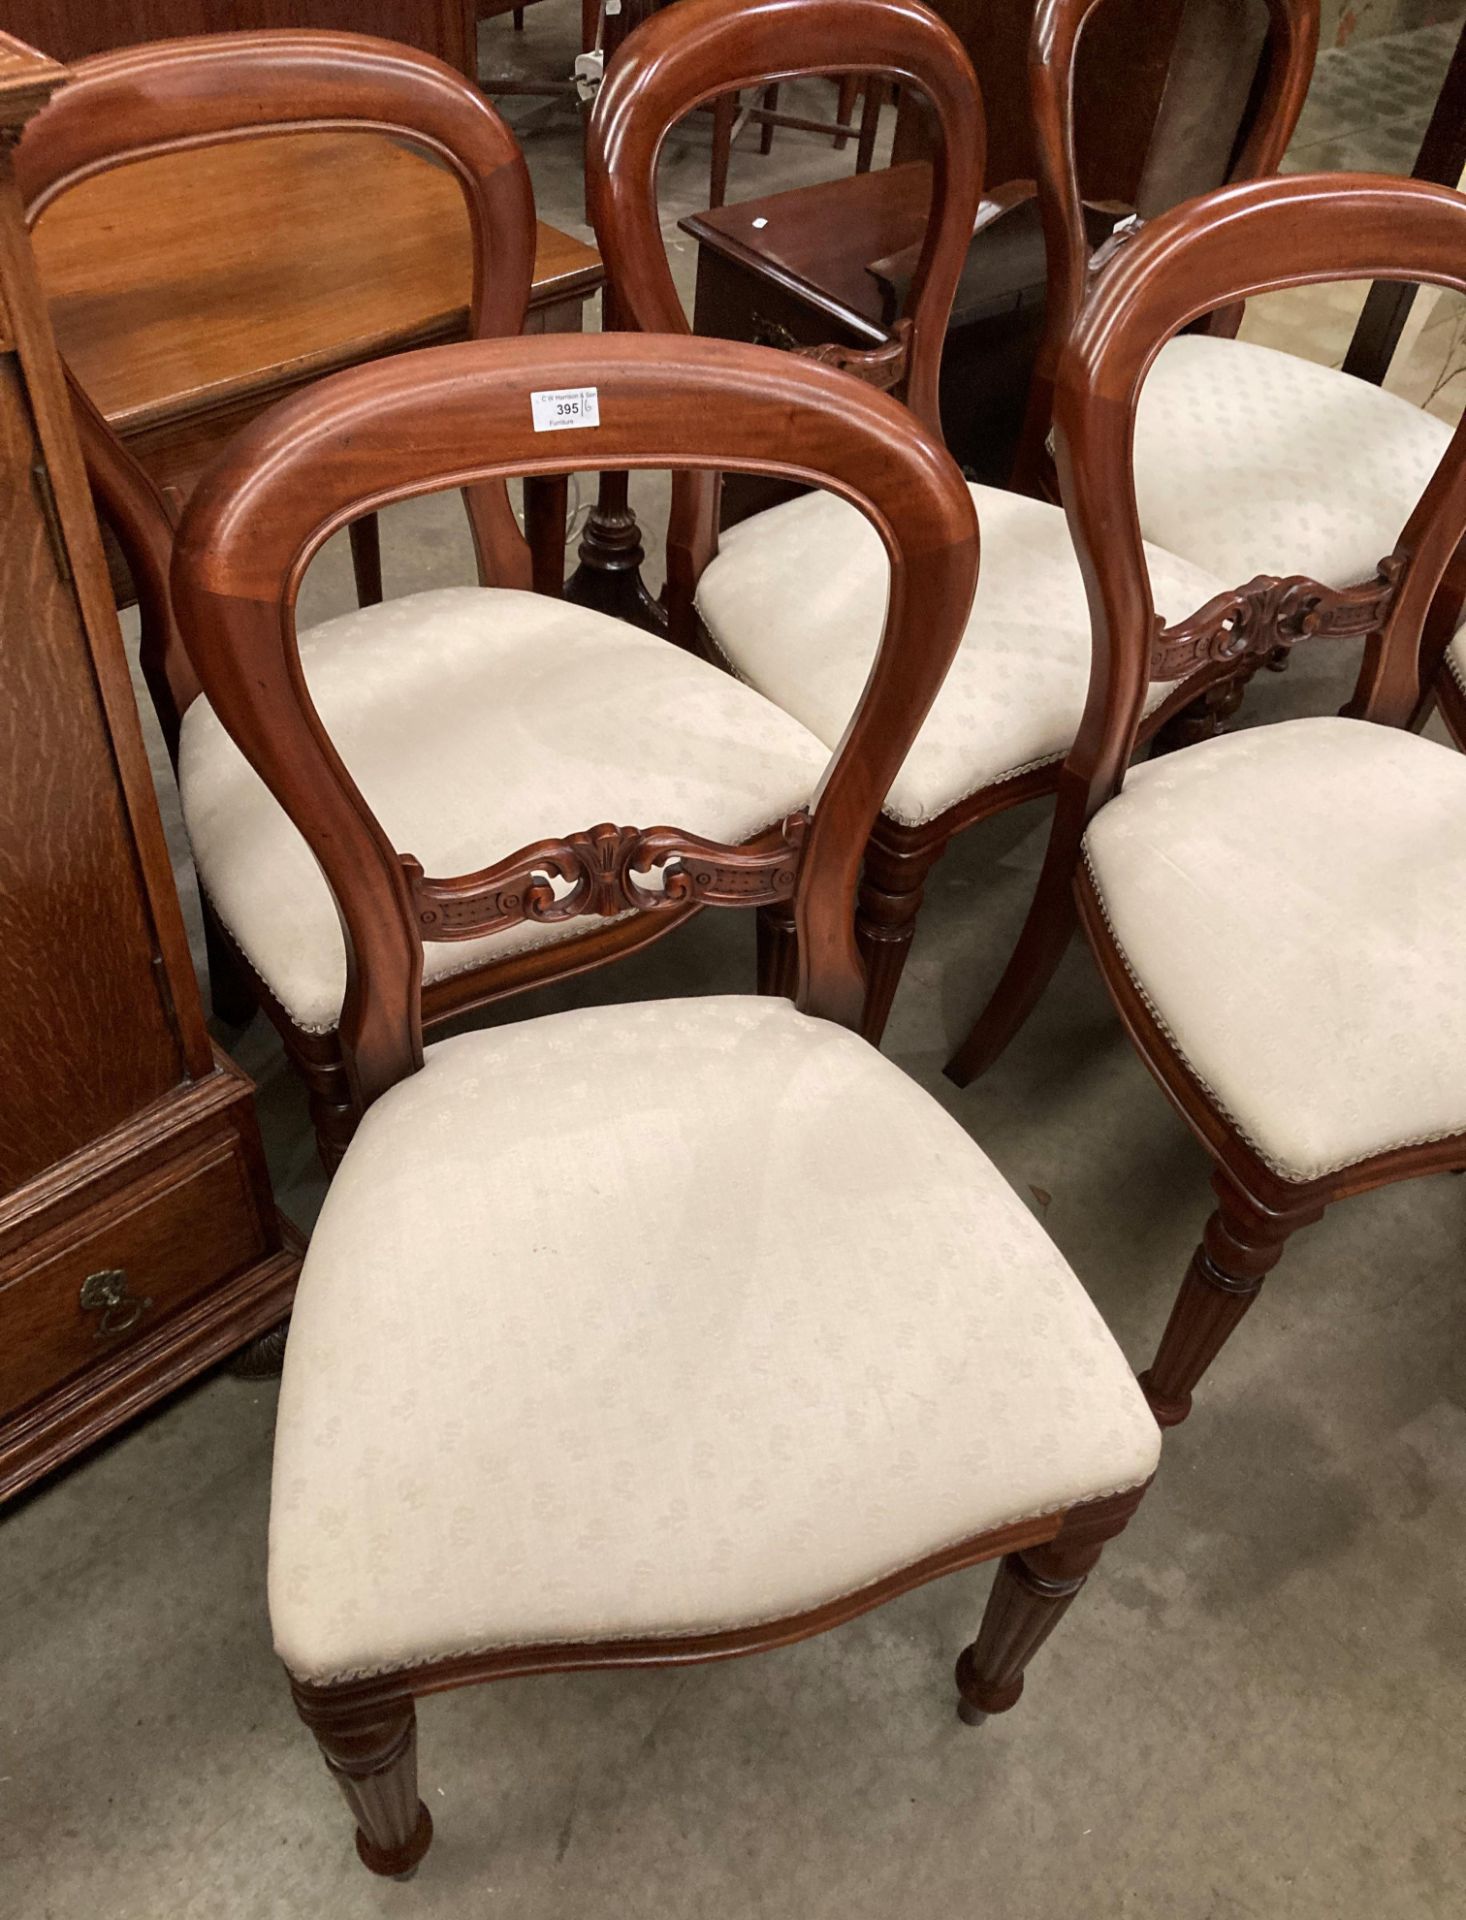 A set of six mahogany balloon back dining chairs with beige upholstered seats, - Image 2 of 3